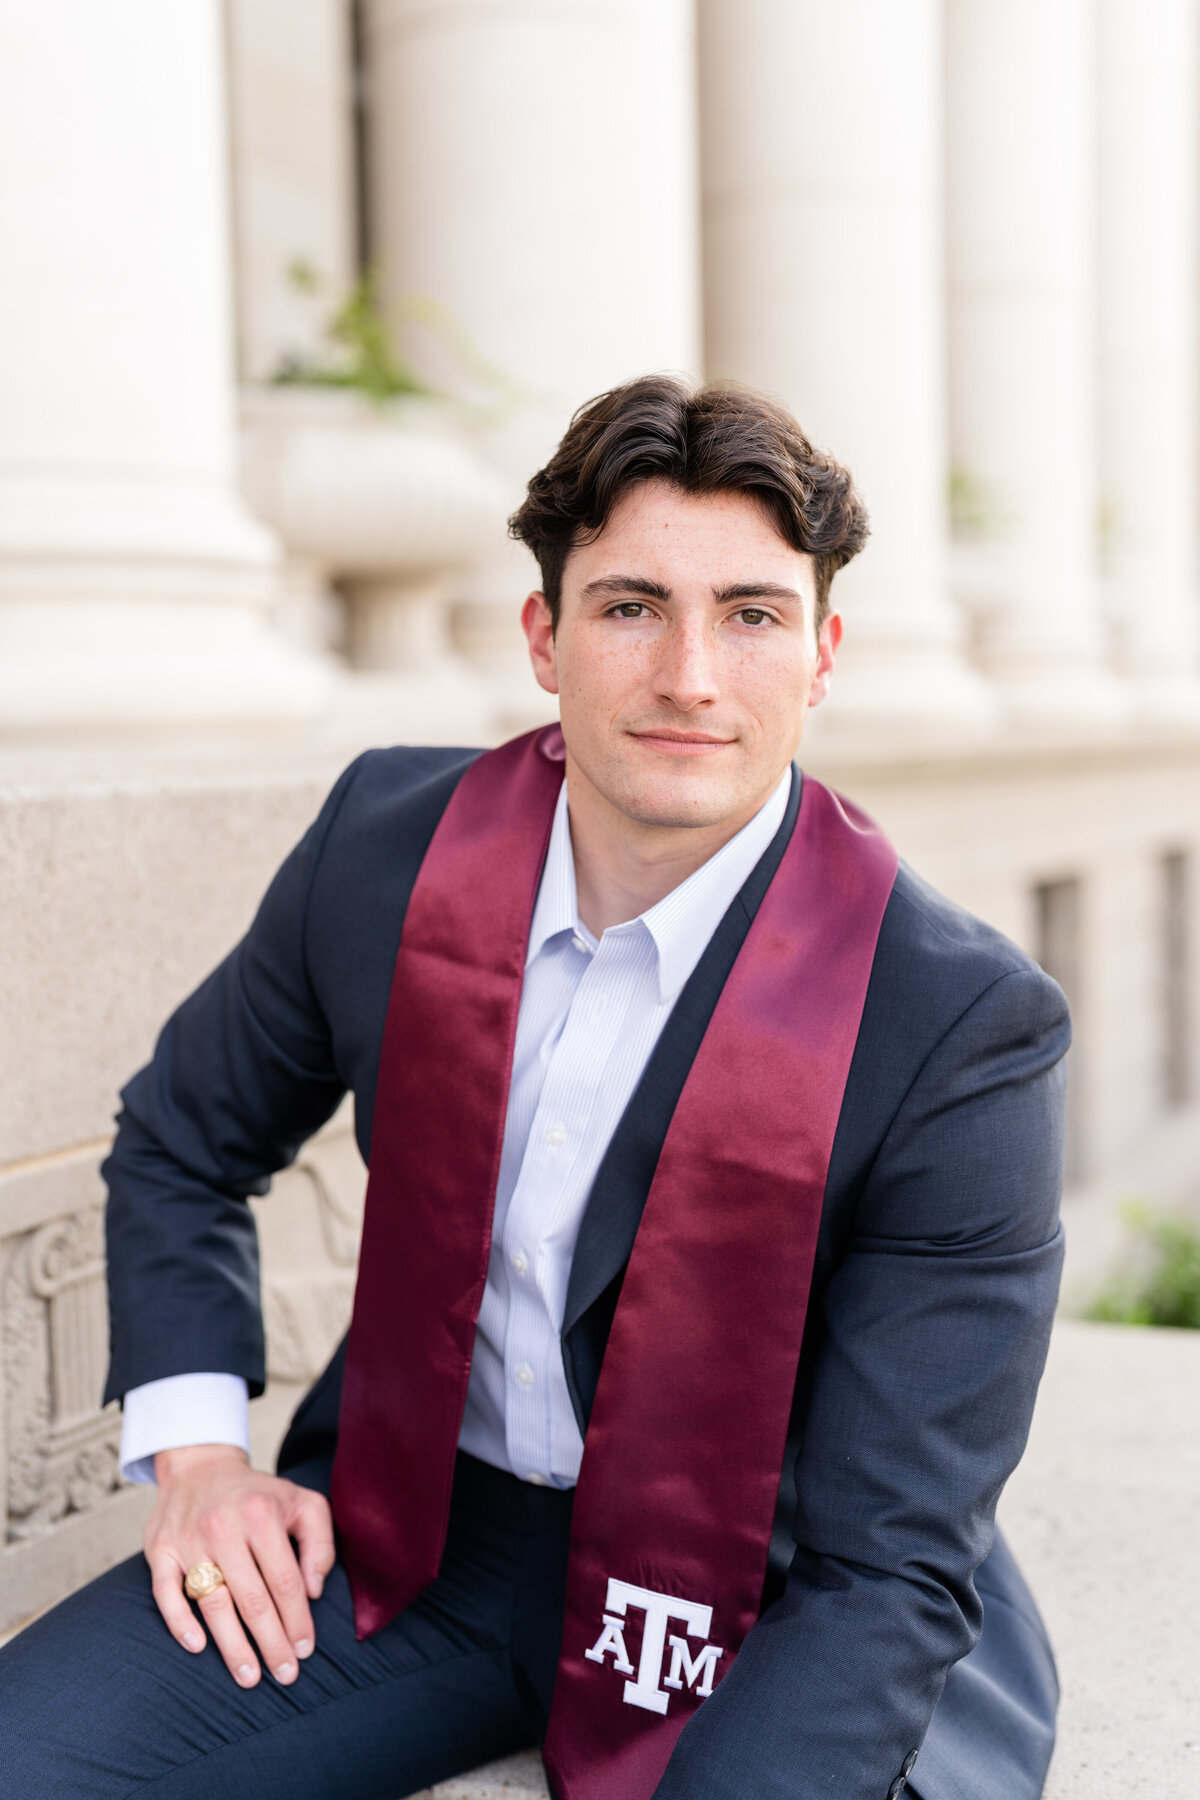 Texas A&M senior guy sitting in front of Administration Building and leaning on leg while wearing suit and Aggie stole